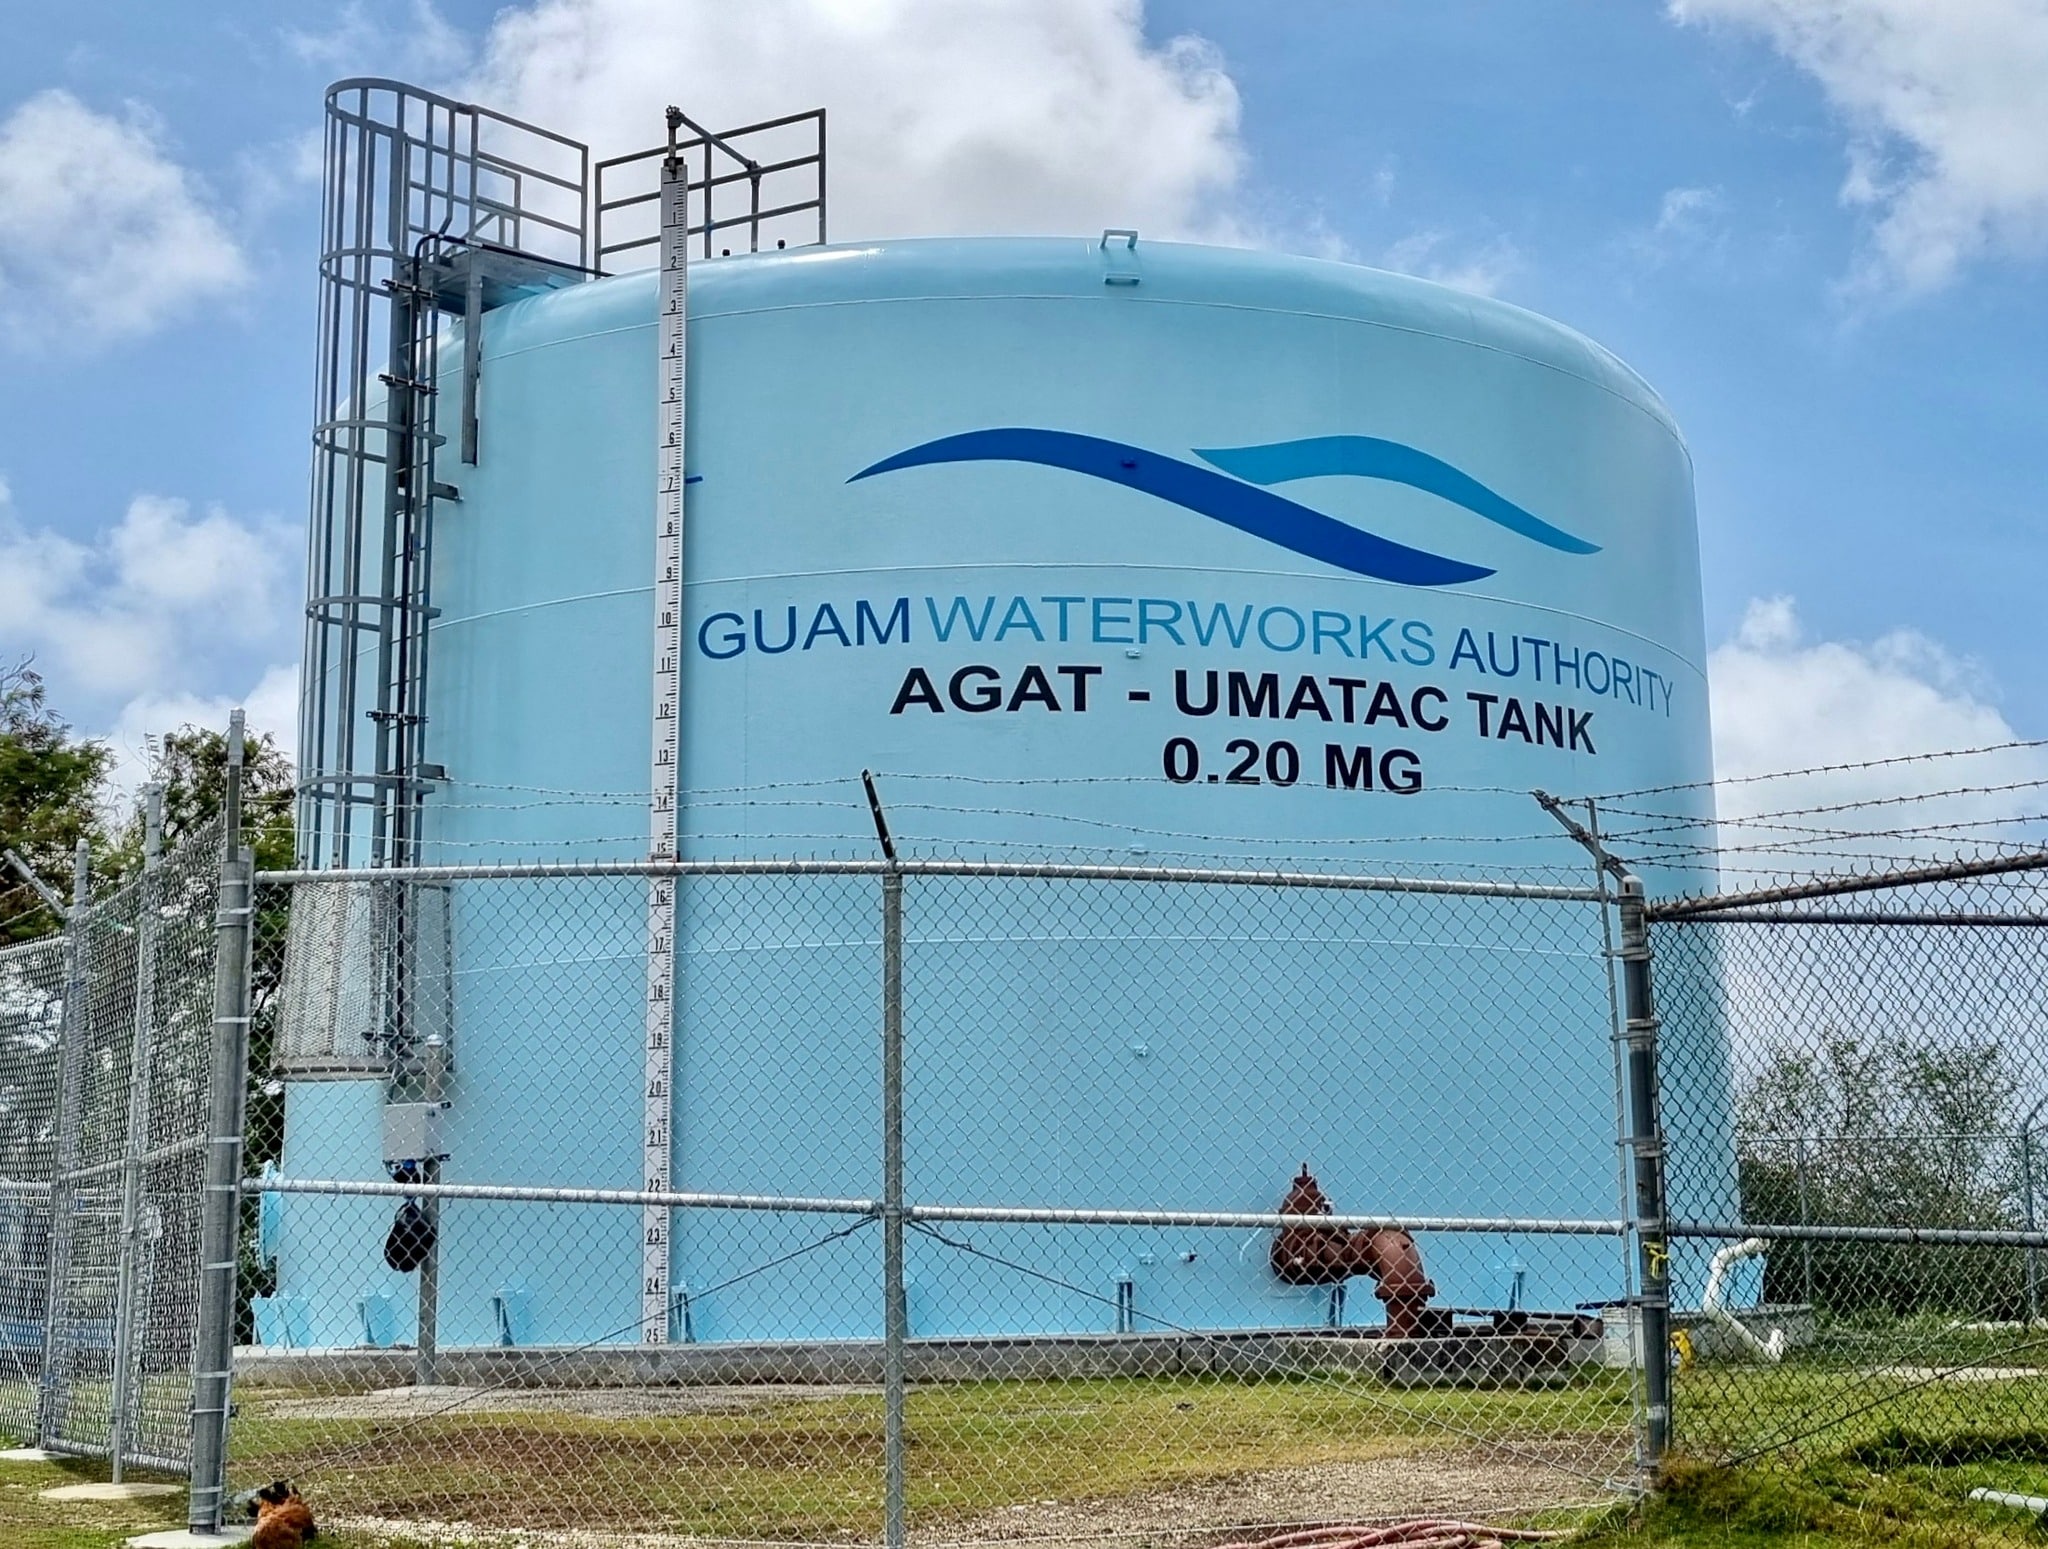 Guam could have a water problem